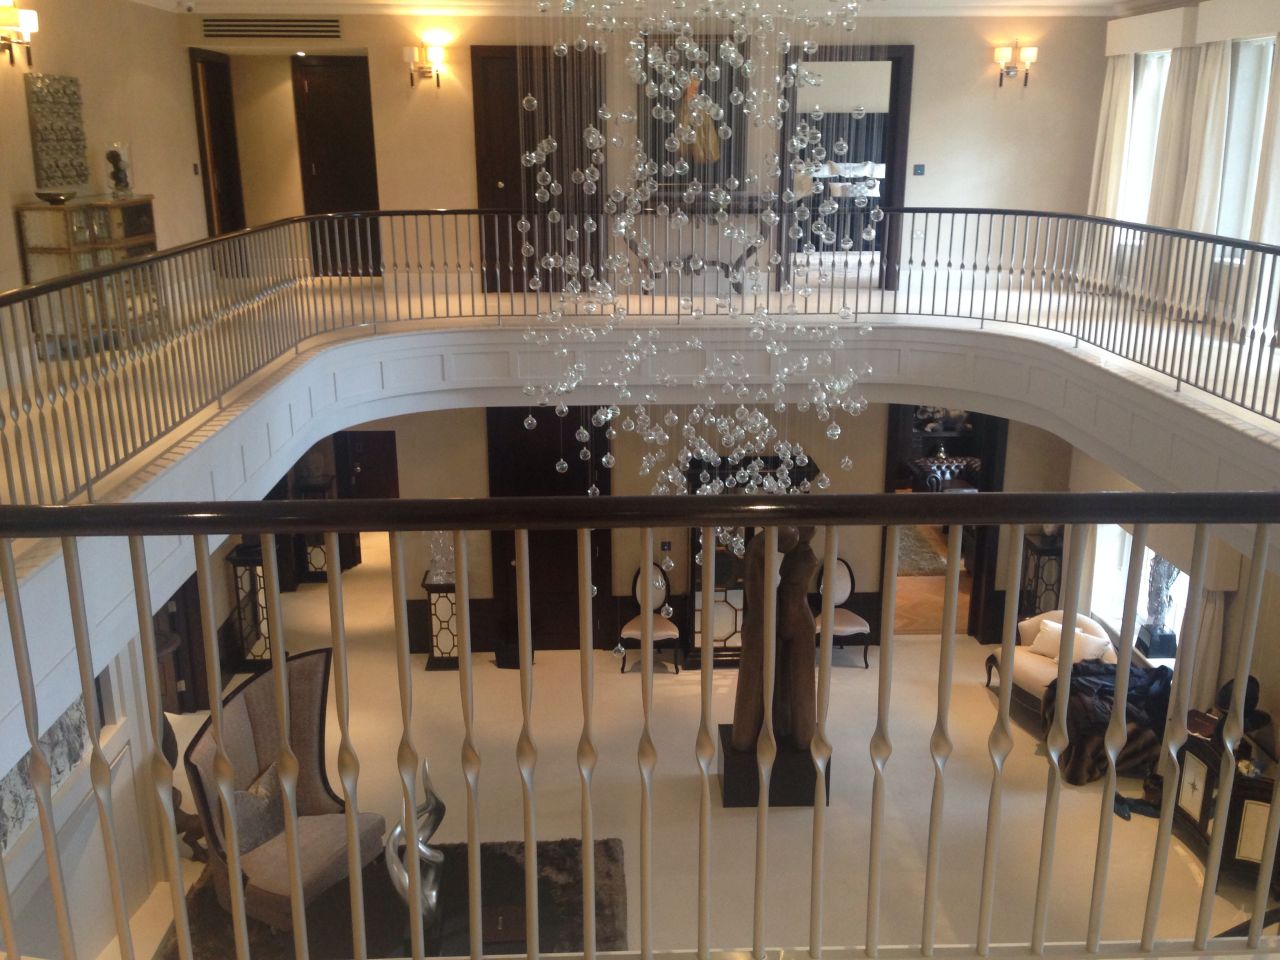 This is the entrance hall of Jersey House, on sale for almost 40 million pounds ($67 million). According to real estate agents, it will sell easily, despite the high price tag.